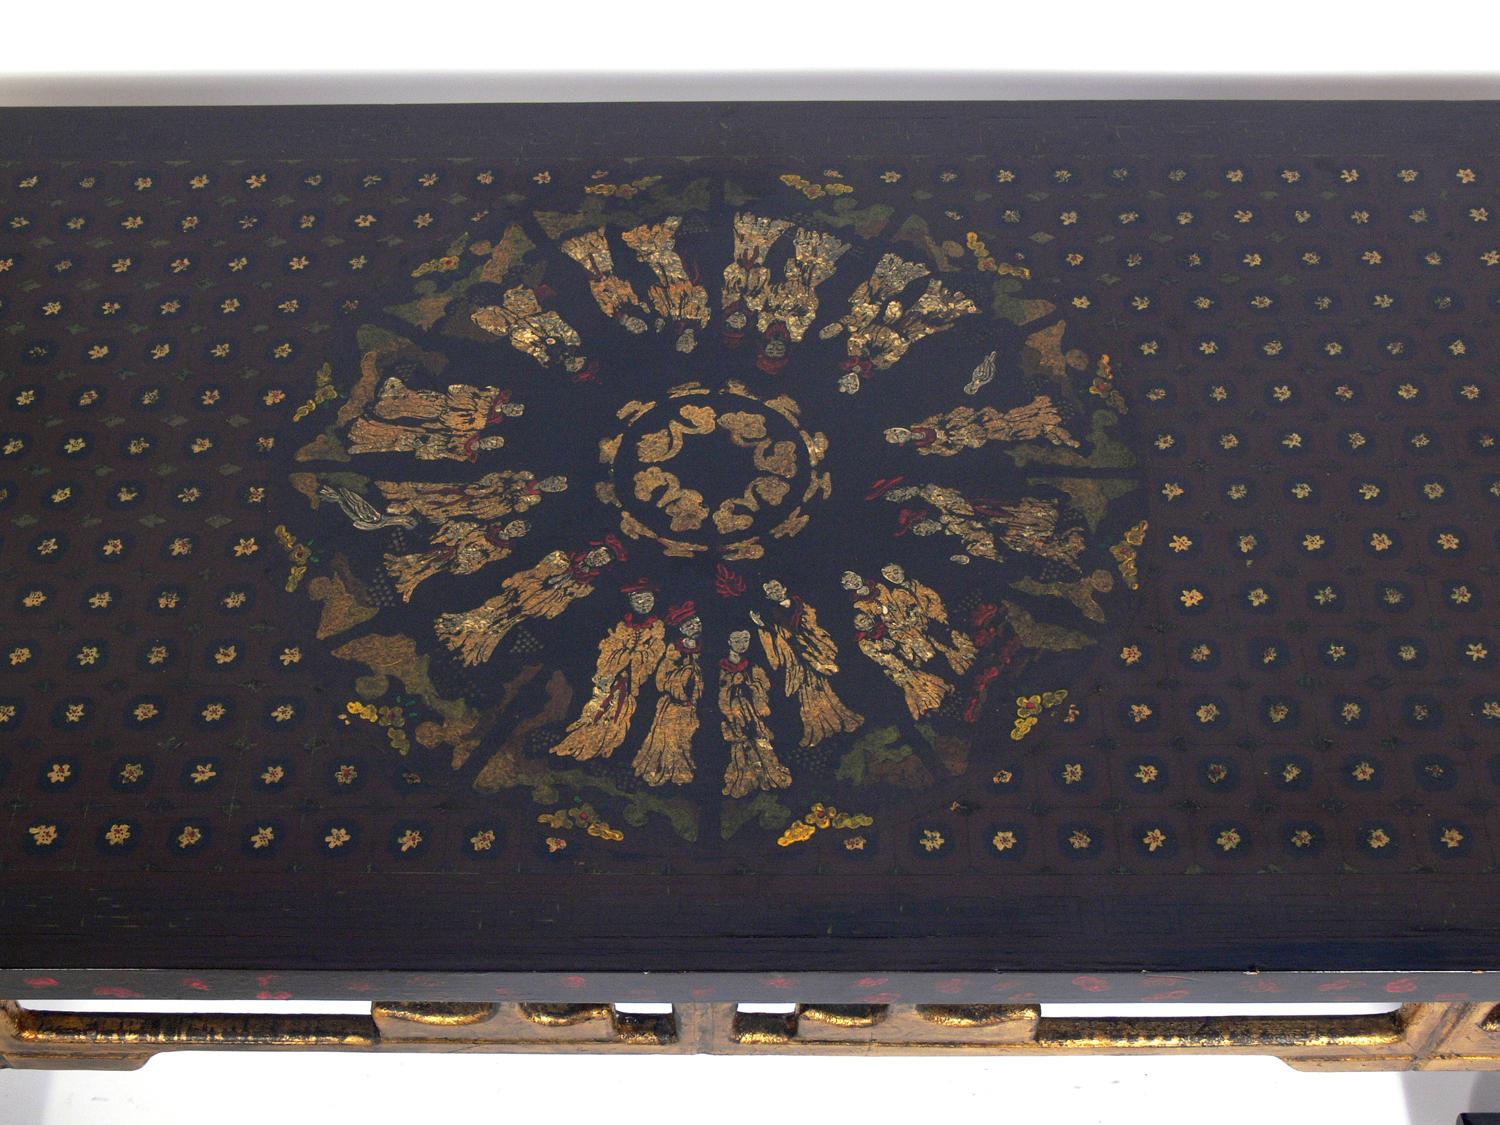 Chinoiserie coffee table, probably Chinese, circa 1950s. Elegant design with lacquered and gold leaf elements.